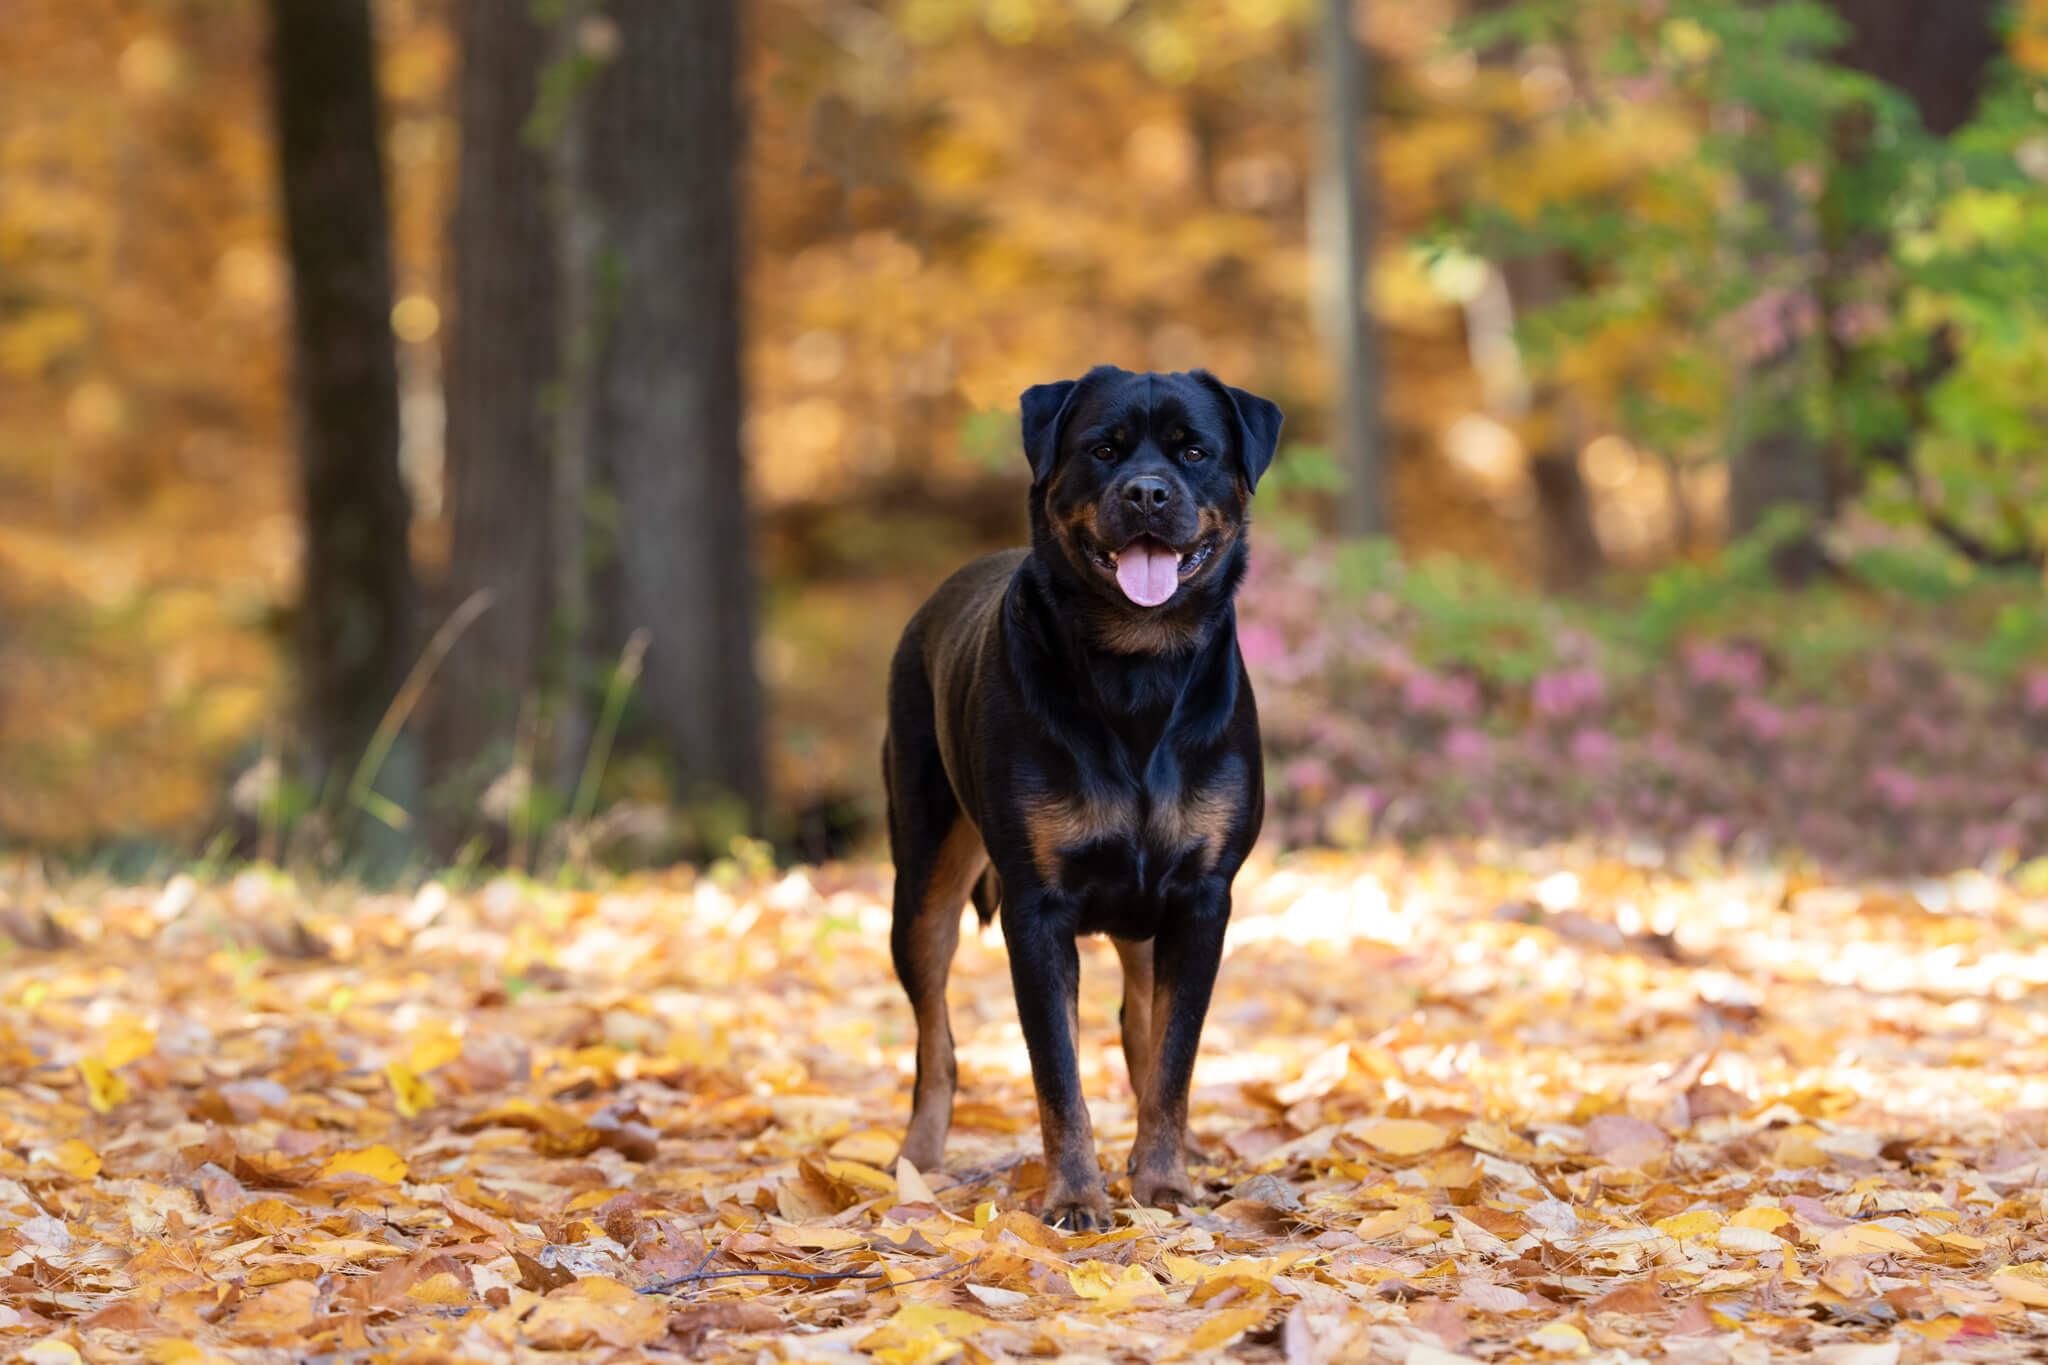 Smiling Rottweiler stands in the forest among fallen leaves